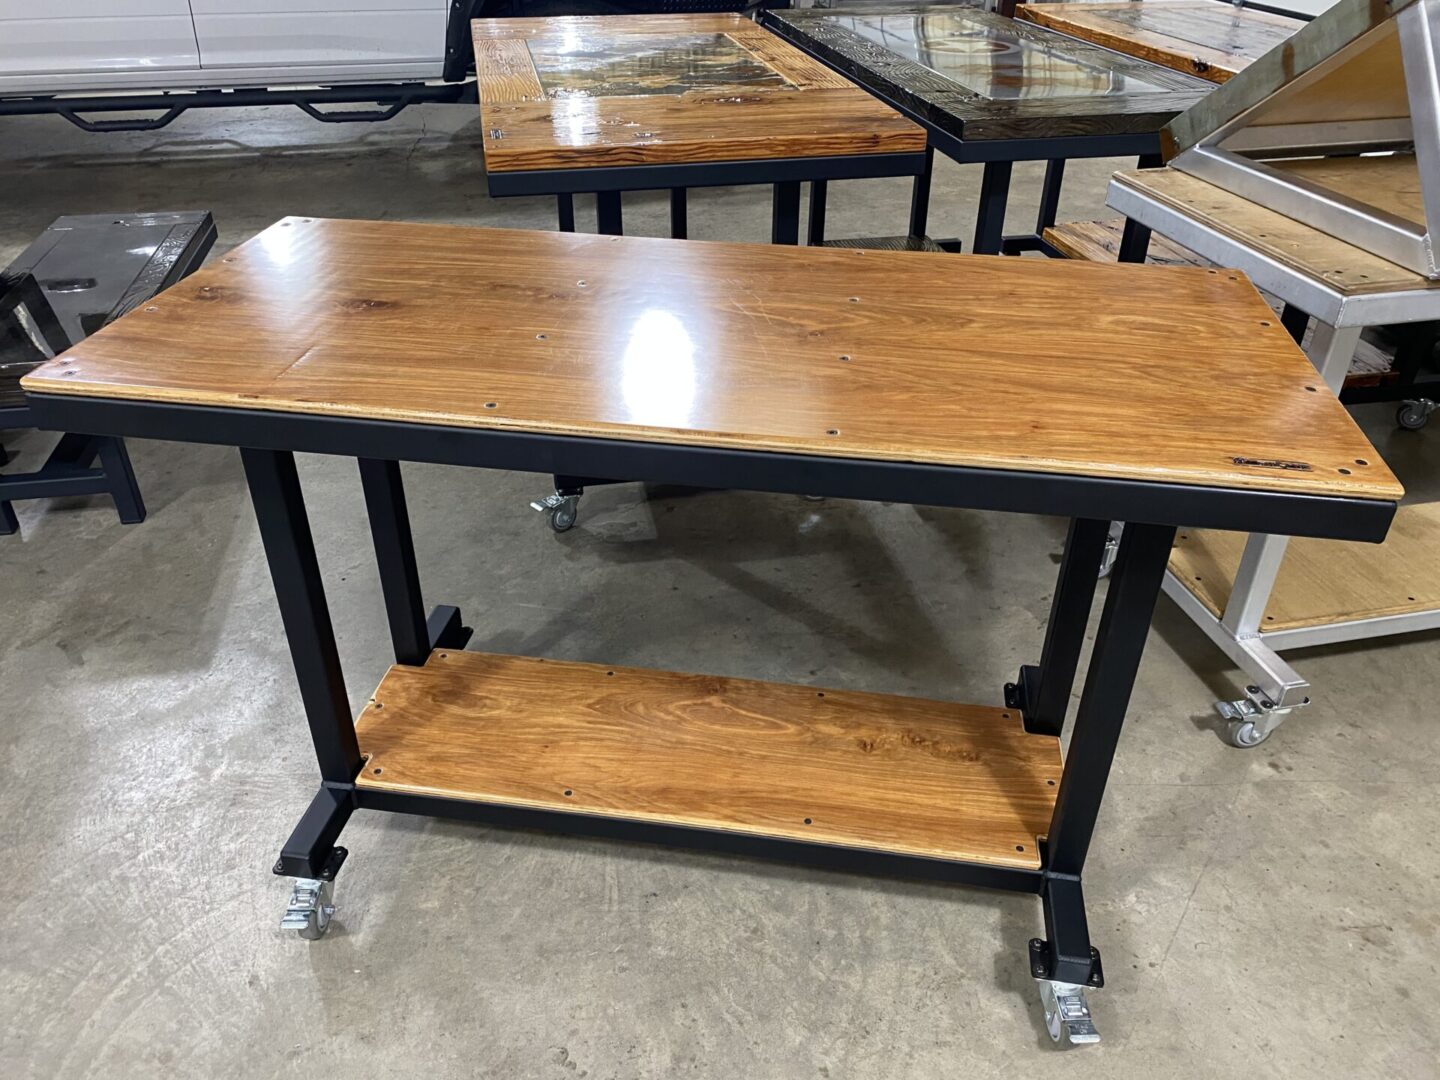 Cabinet Grade Plywood Series Worktable with wheels